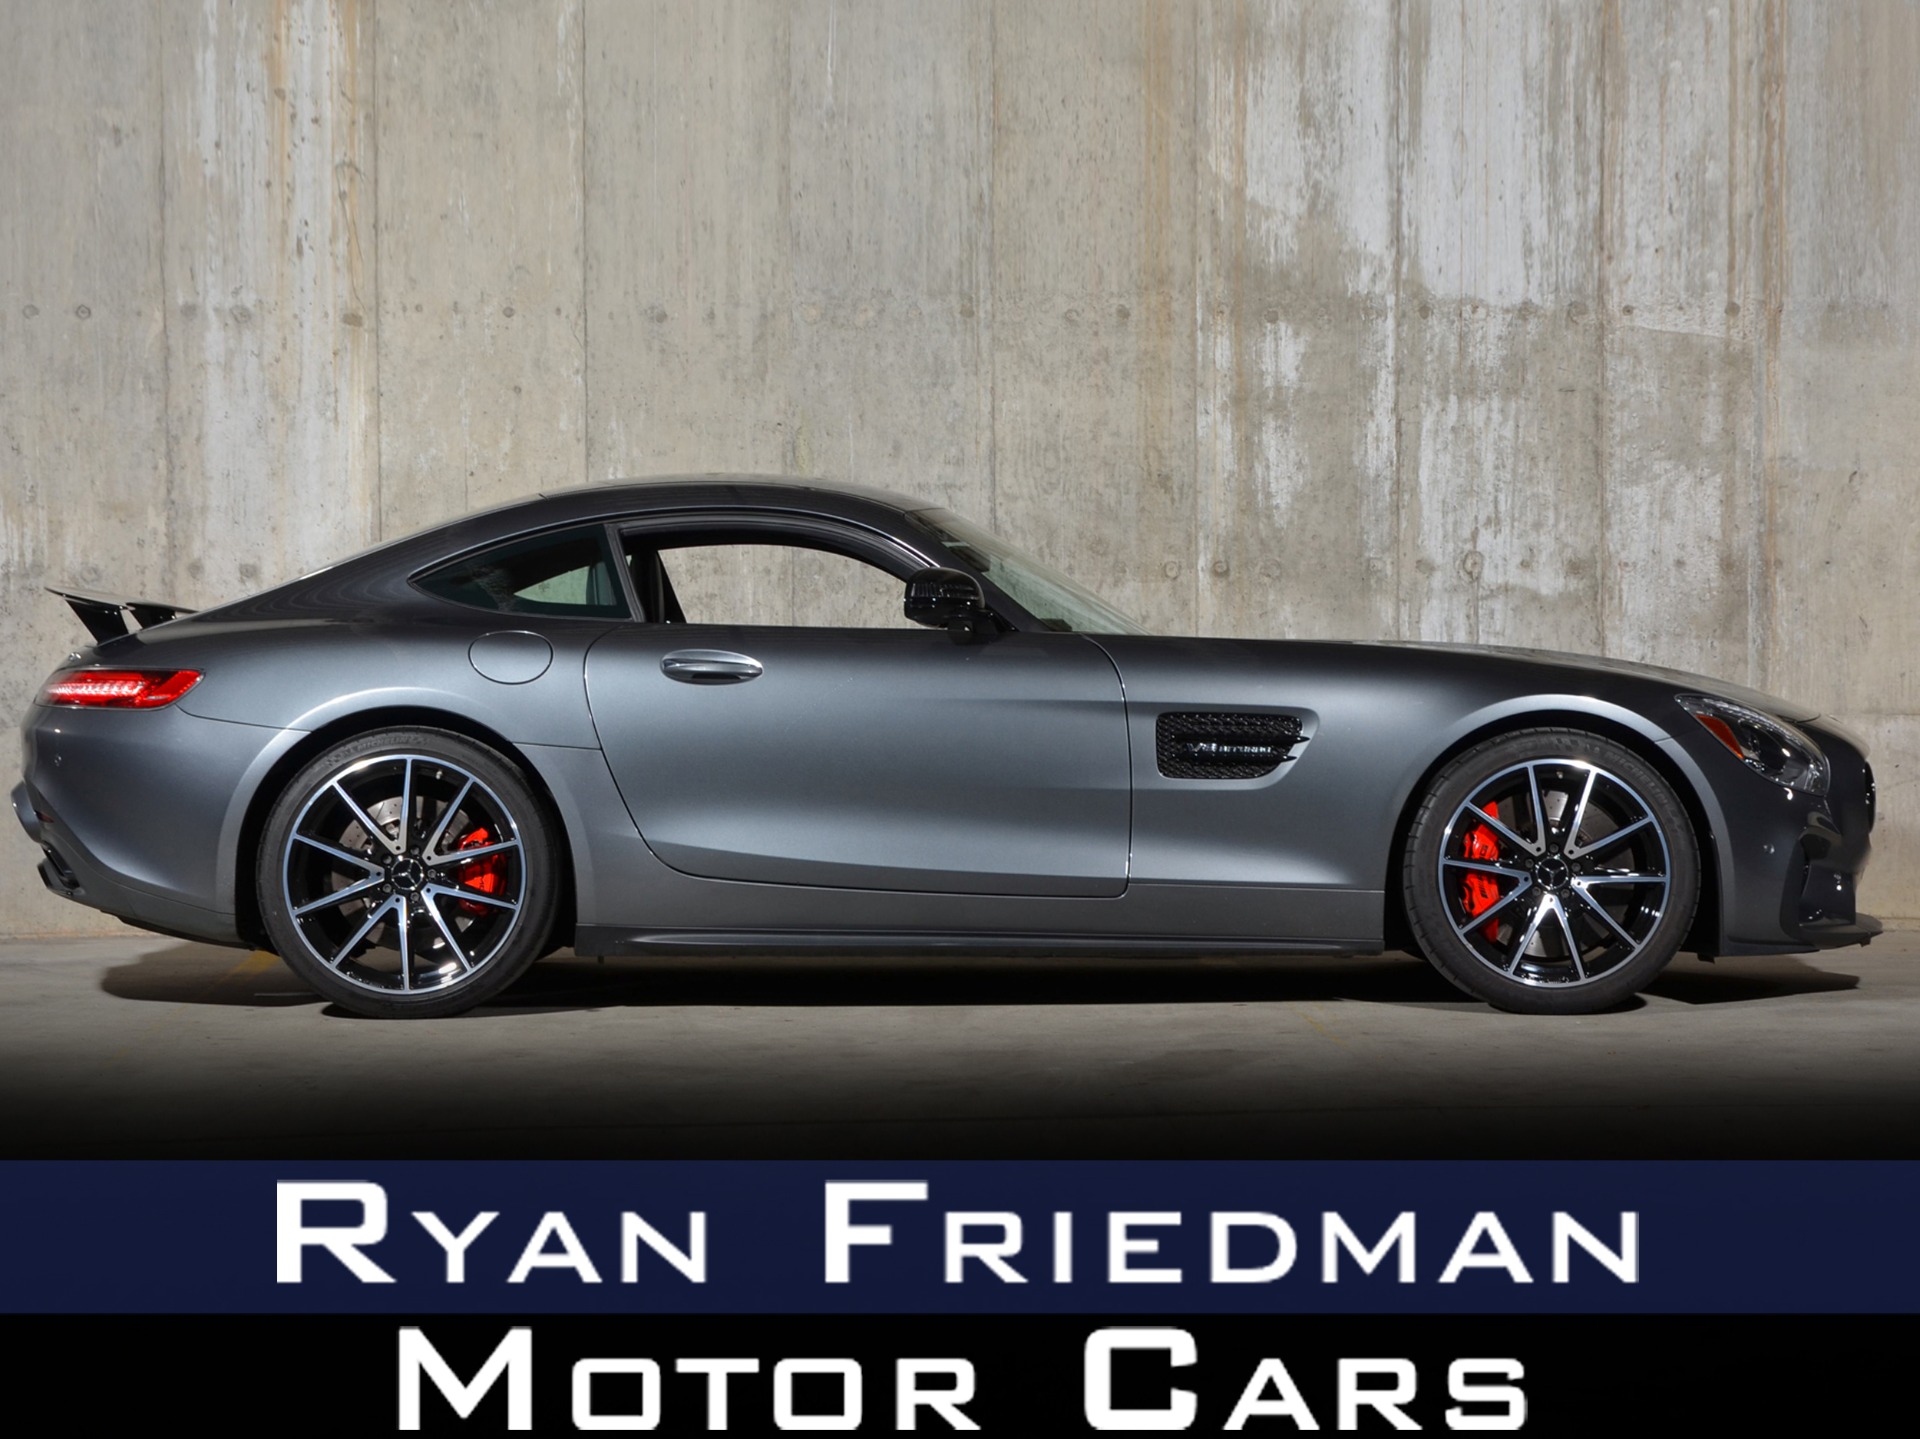 Mercedes-Benz AMG GT S for sale at ERclassics